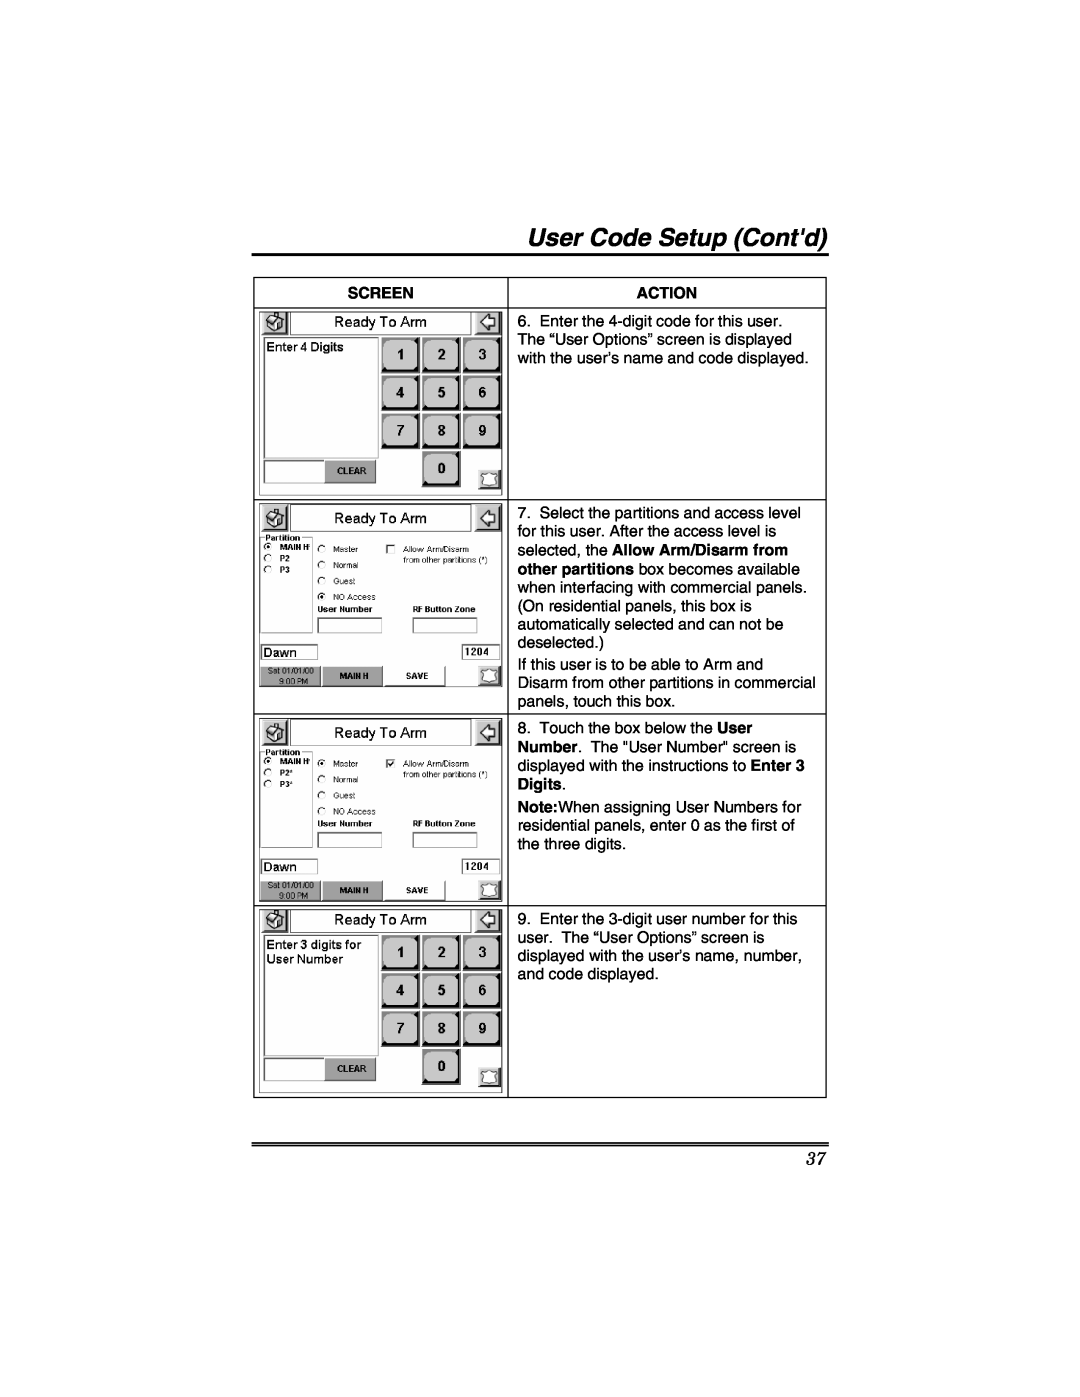 Honeywell 6271V manual User Code Setup Contd, Screen, Action, selected, the Allow Arm/Disarm from, Digits 